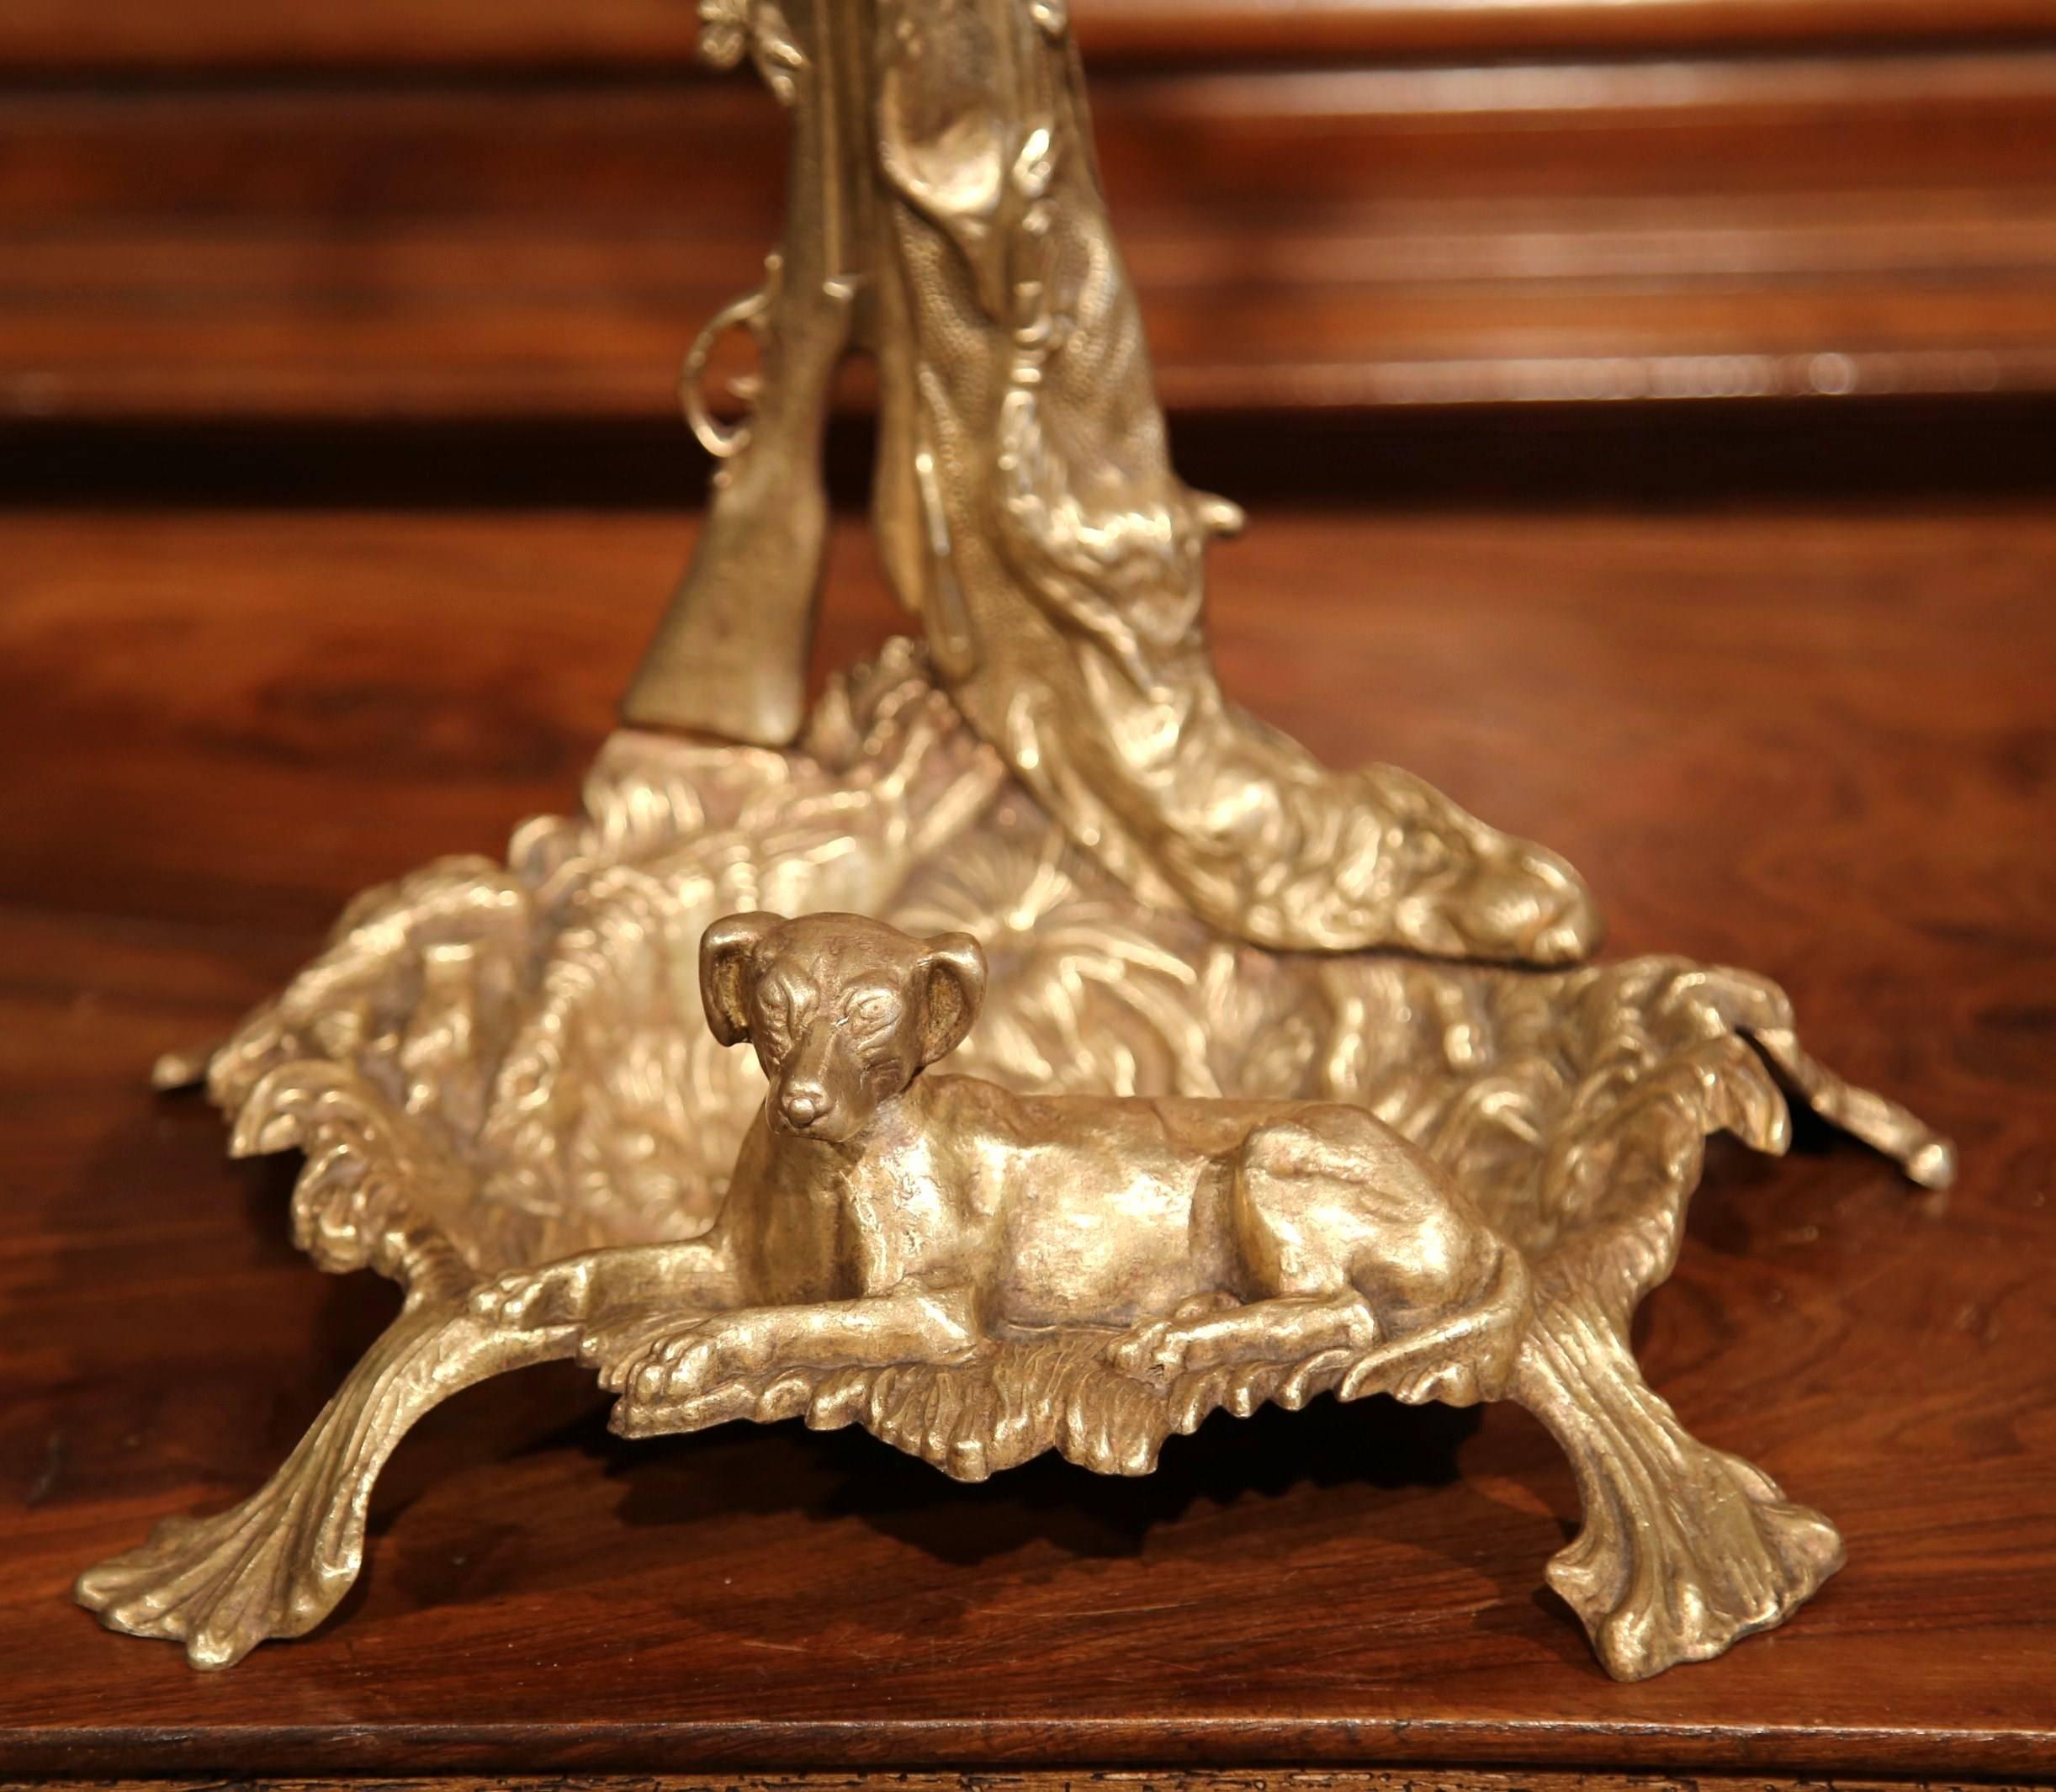 Patinated 19th Century French Napoleon III Brass Umbrella Stand with Hunt Motifs